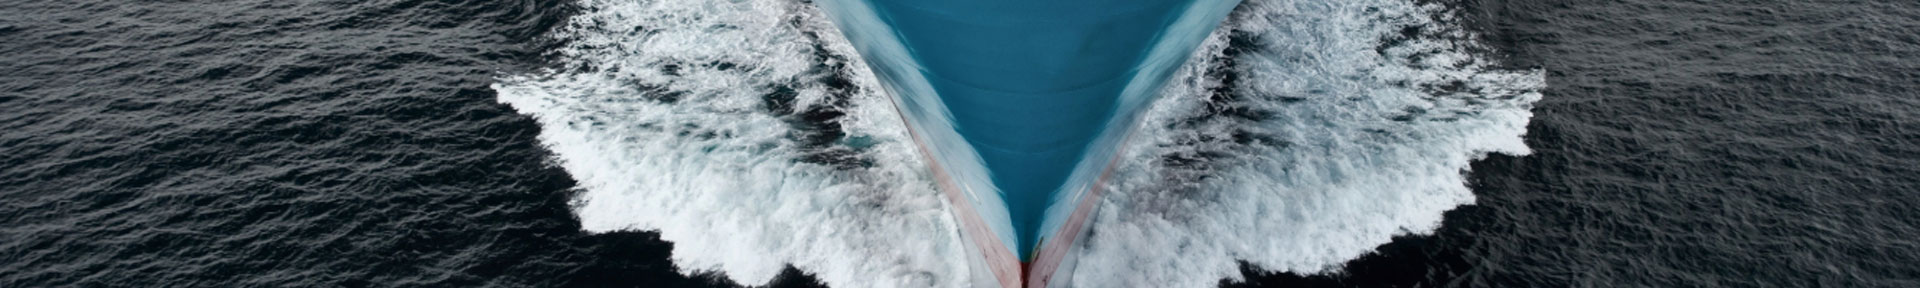 The bow of a Maersk ship at sea